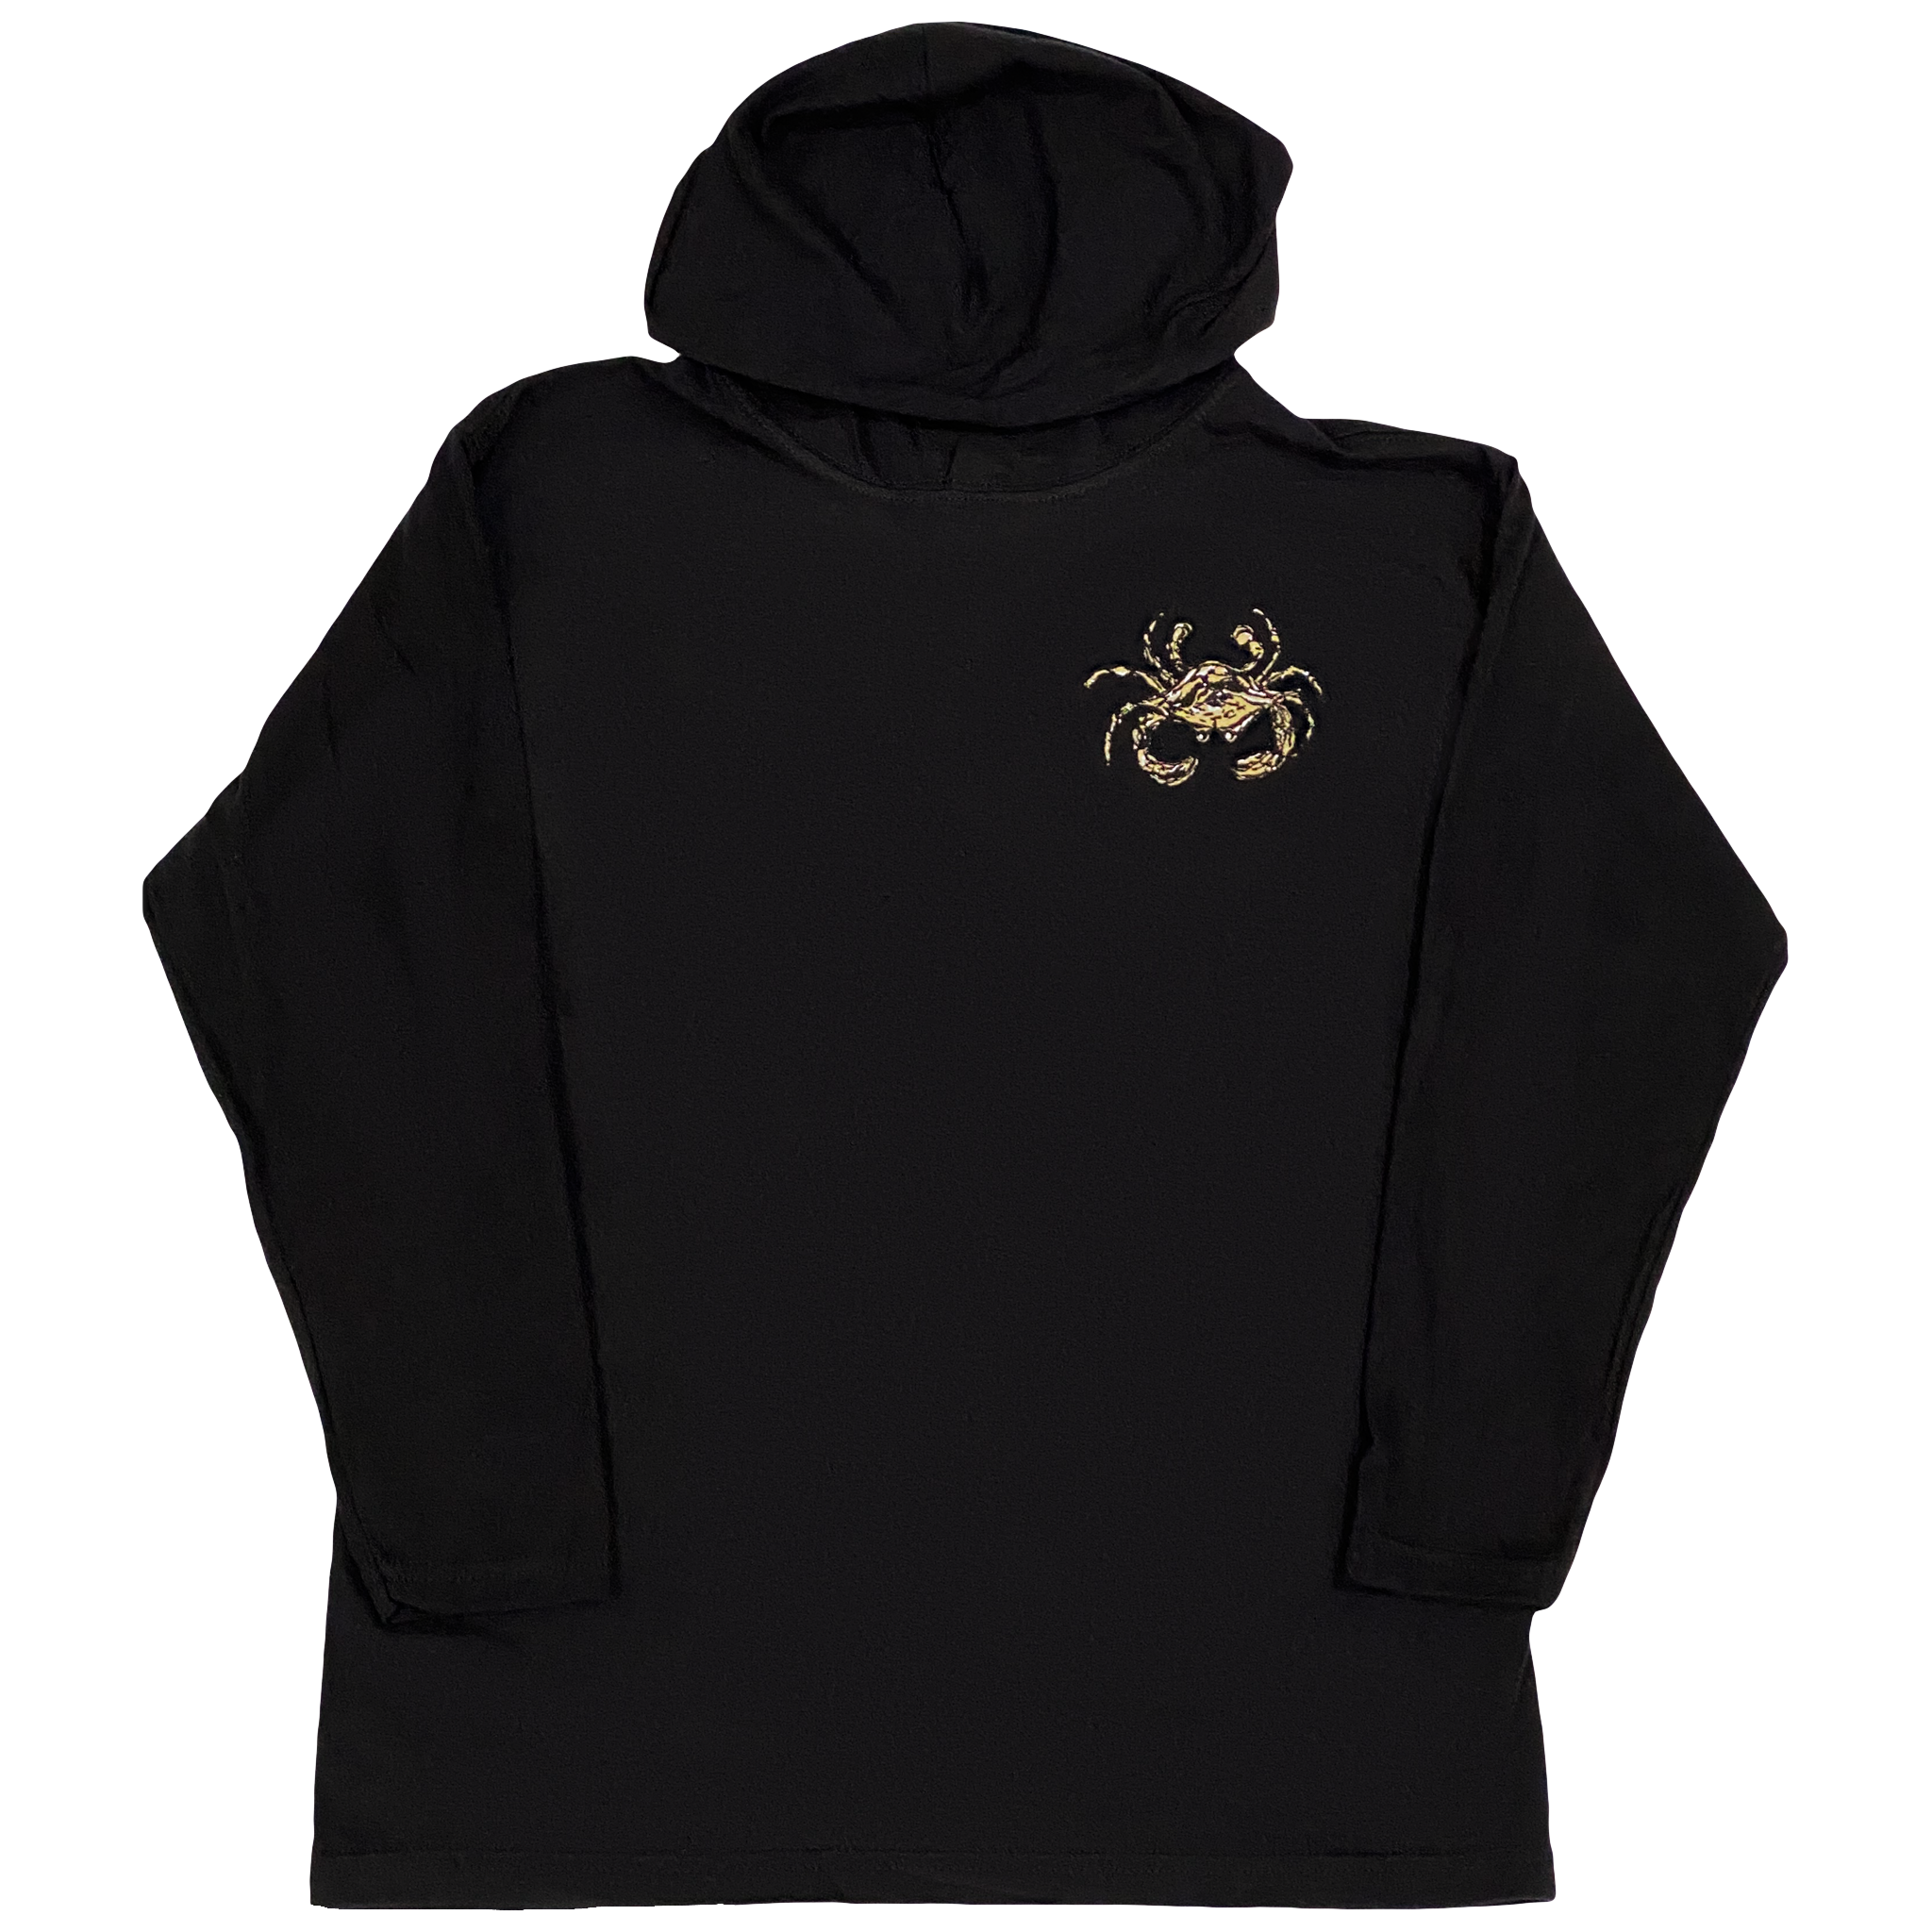 A long sleeve black hooded t-shirt with a gold, white, and black crab on the left chest.